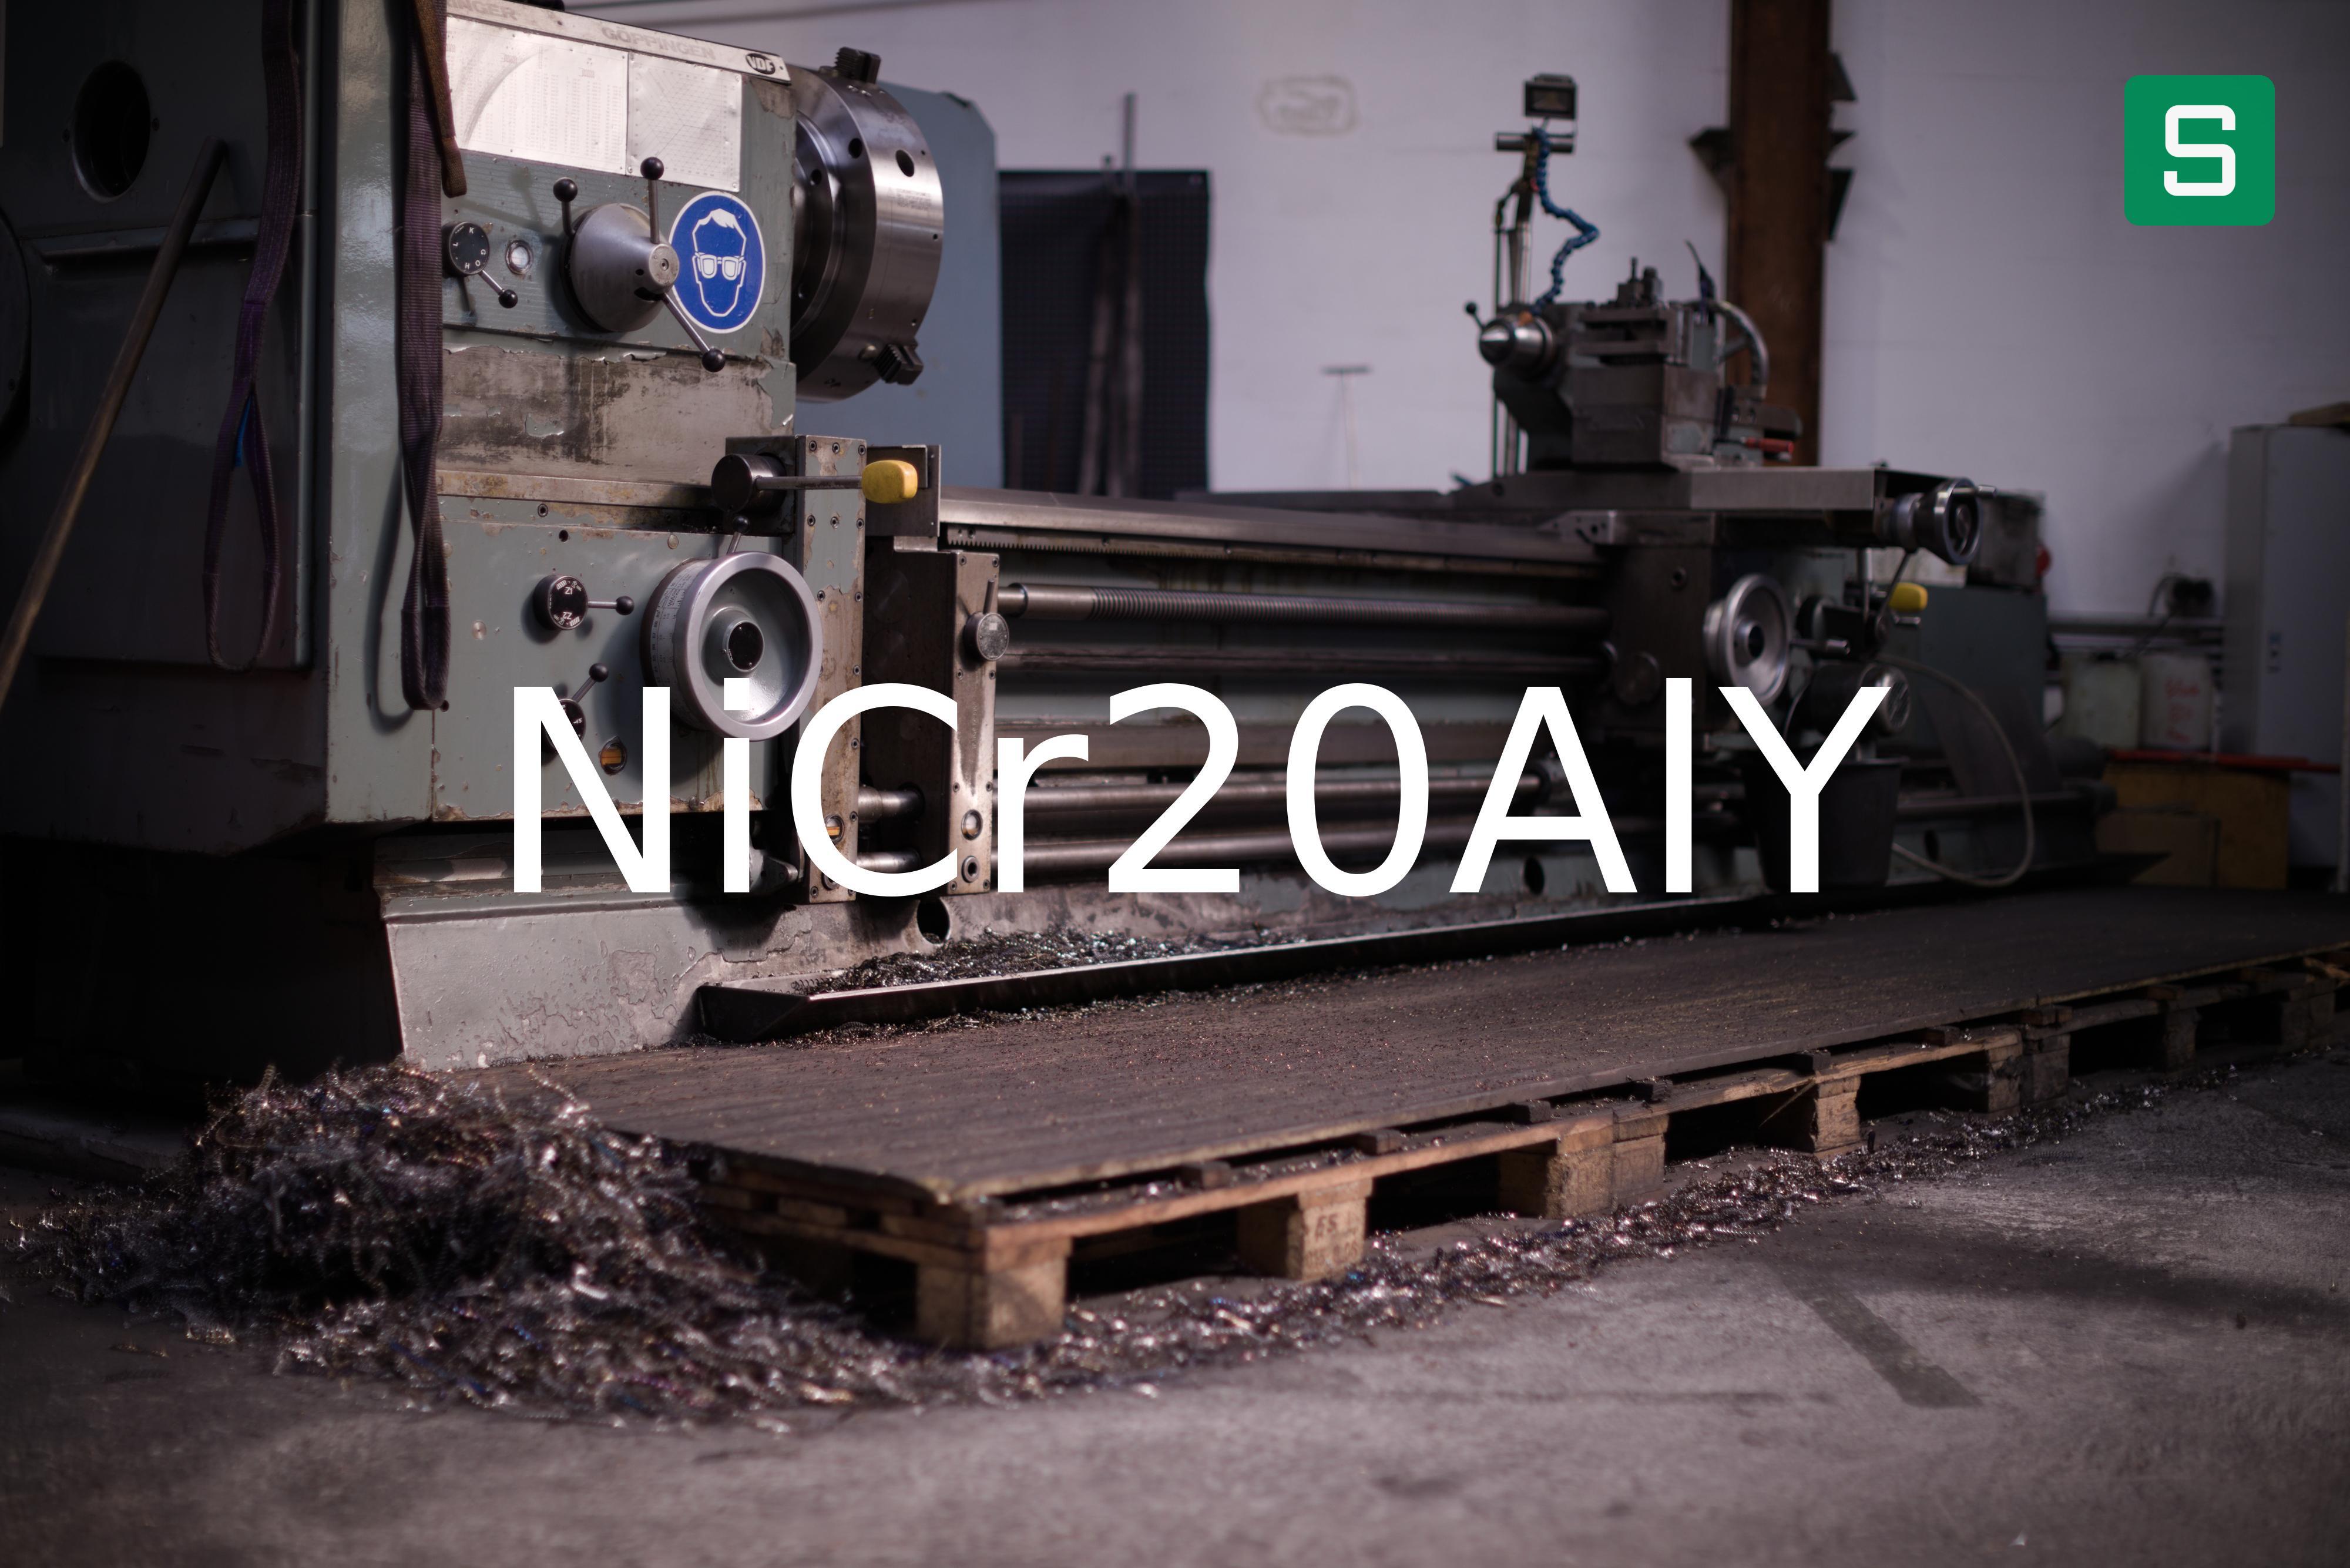 Steel Material: NiCr20AlY